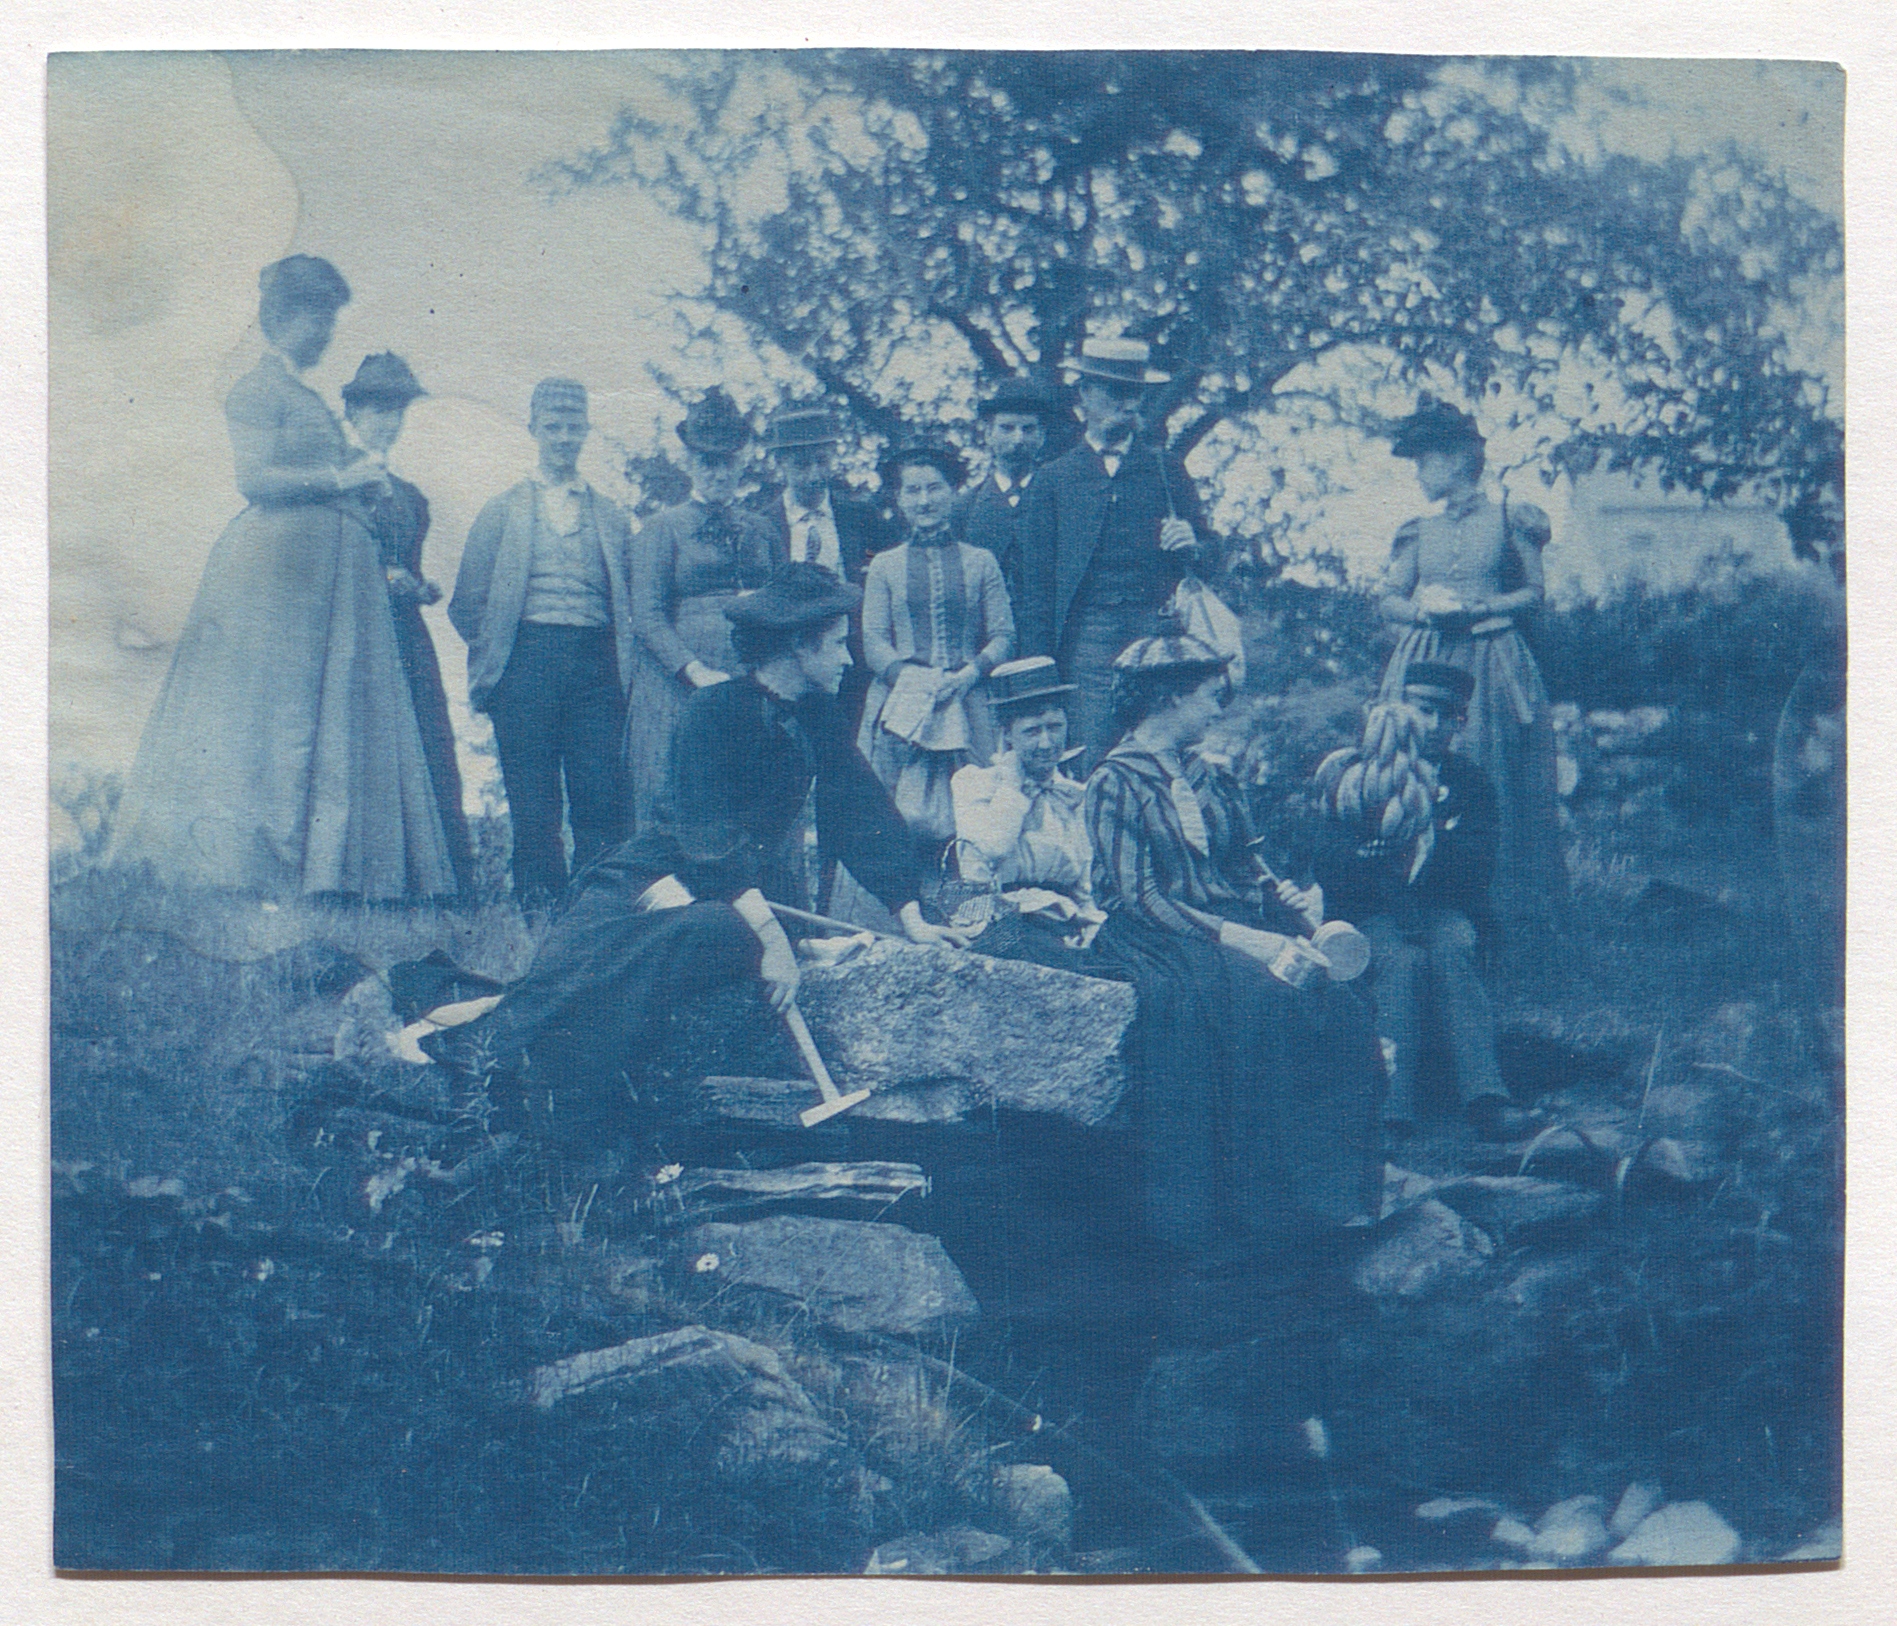 Cyanotype photograph of a group of people in an outdoors setting.